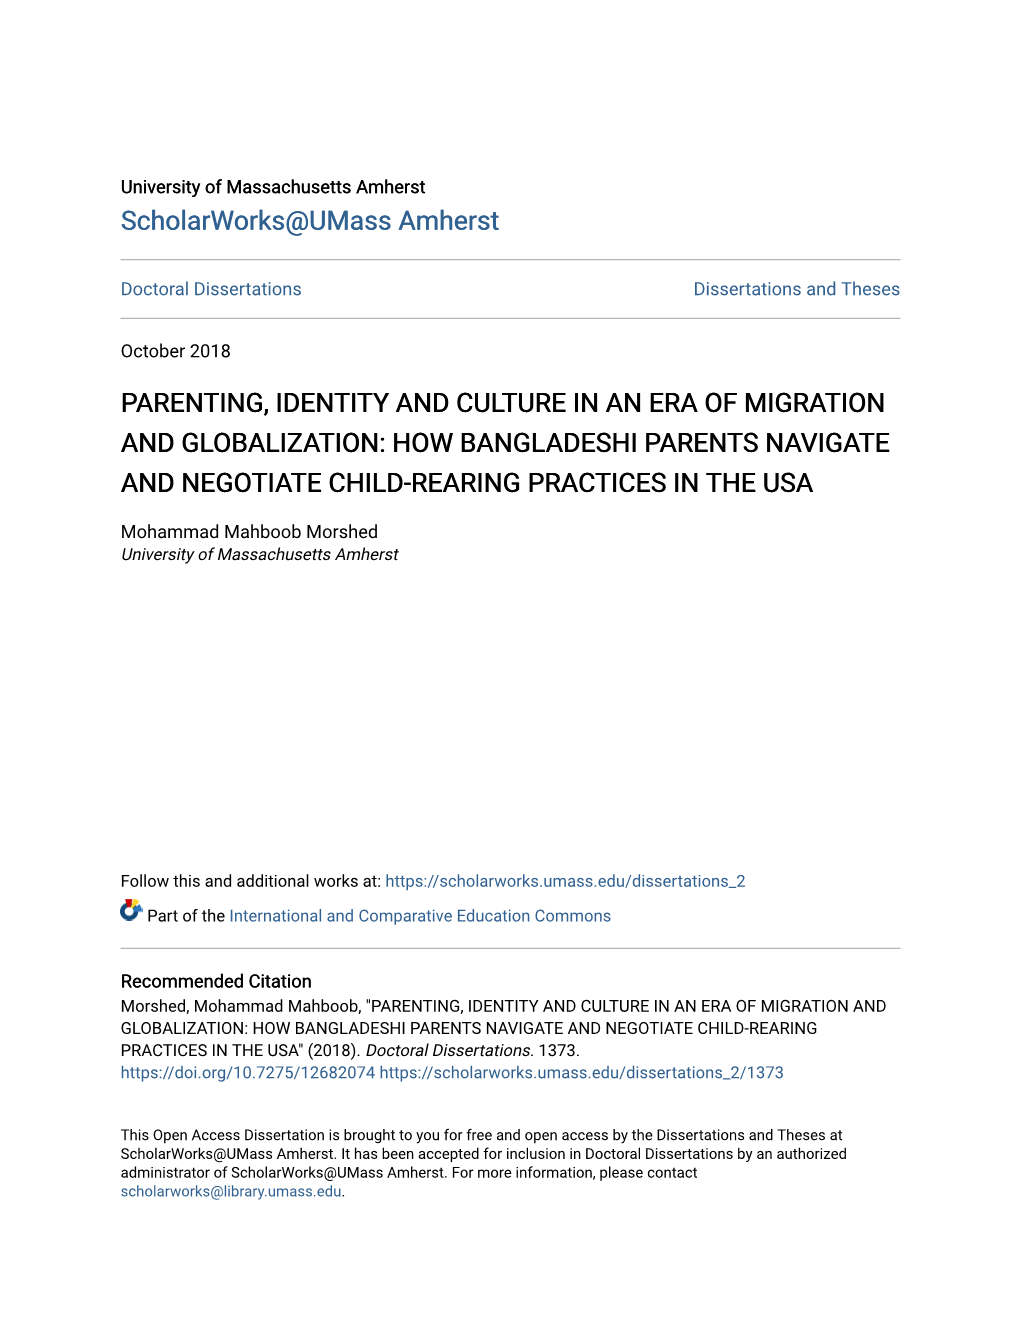 Parenting, Identity and Culture in an Era of Migration and Globalization: How Bangladeshi Parents Navigate and Negotiate Child-Rearing Practices in the Usa